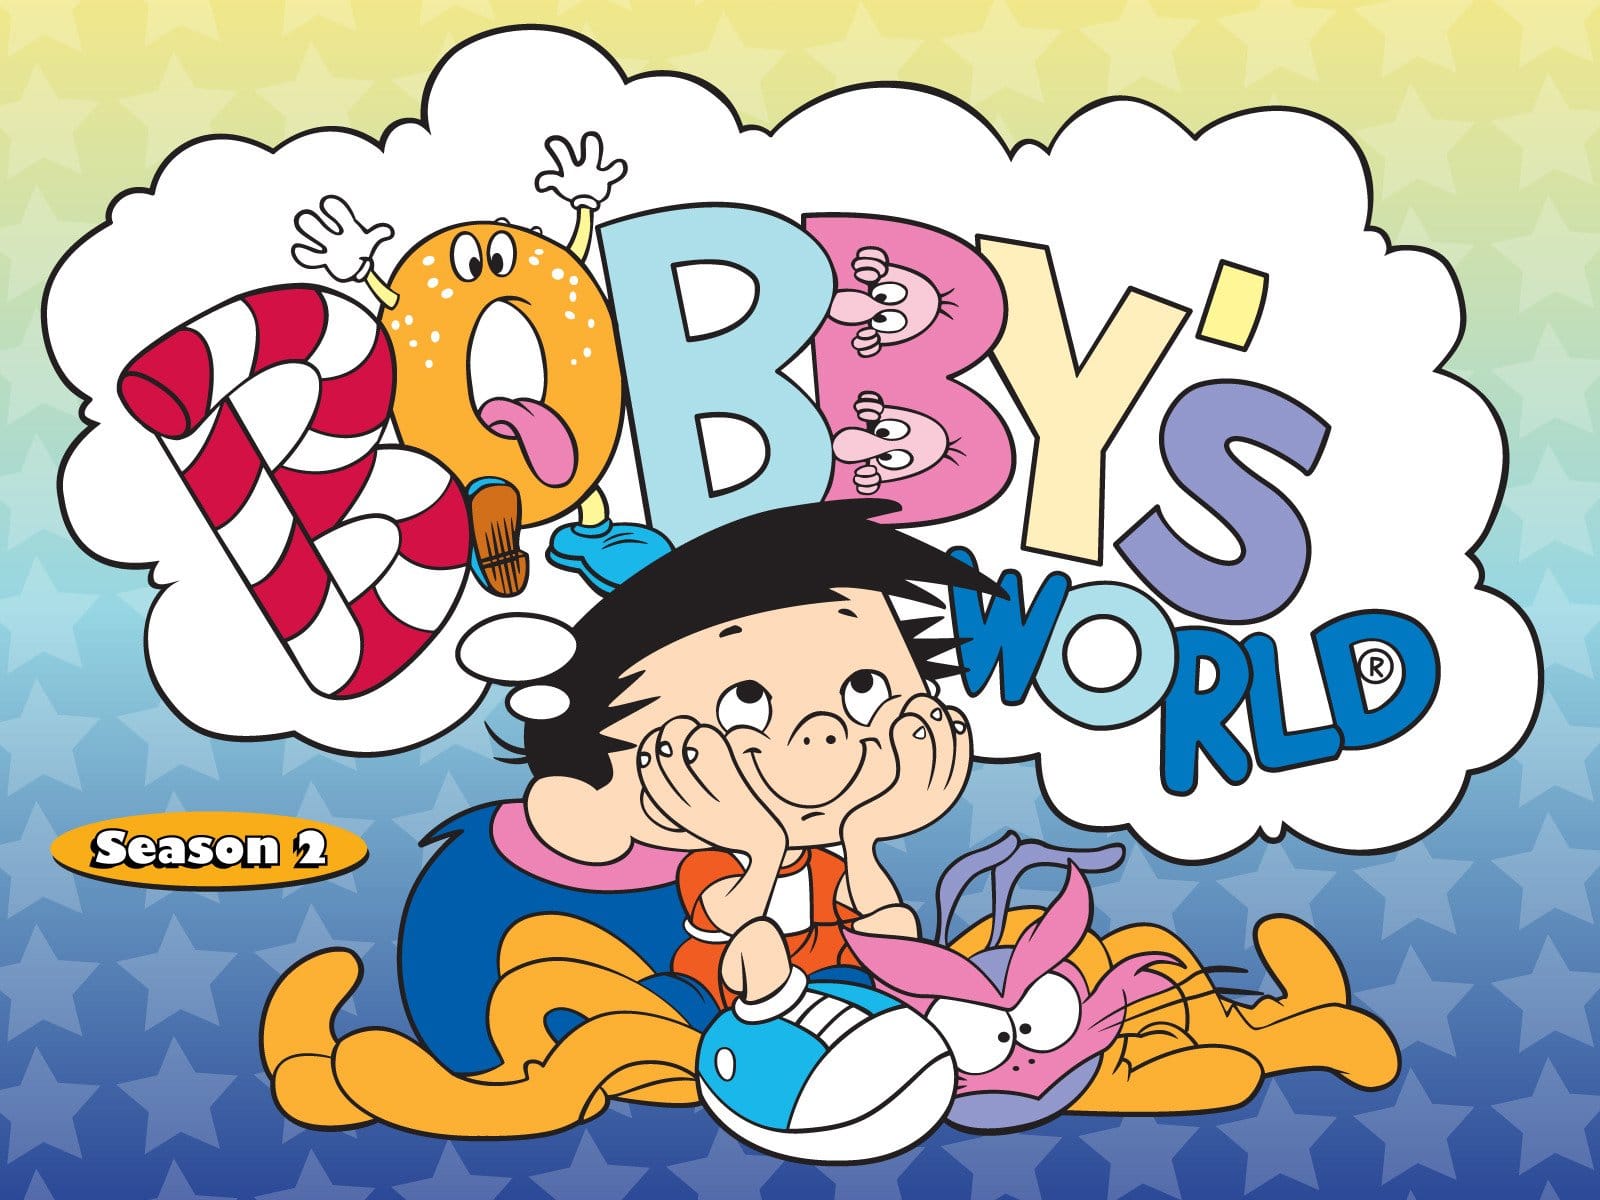 Bobby's World Cast and Their Roles